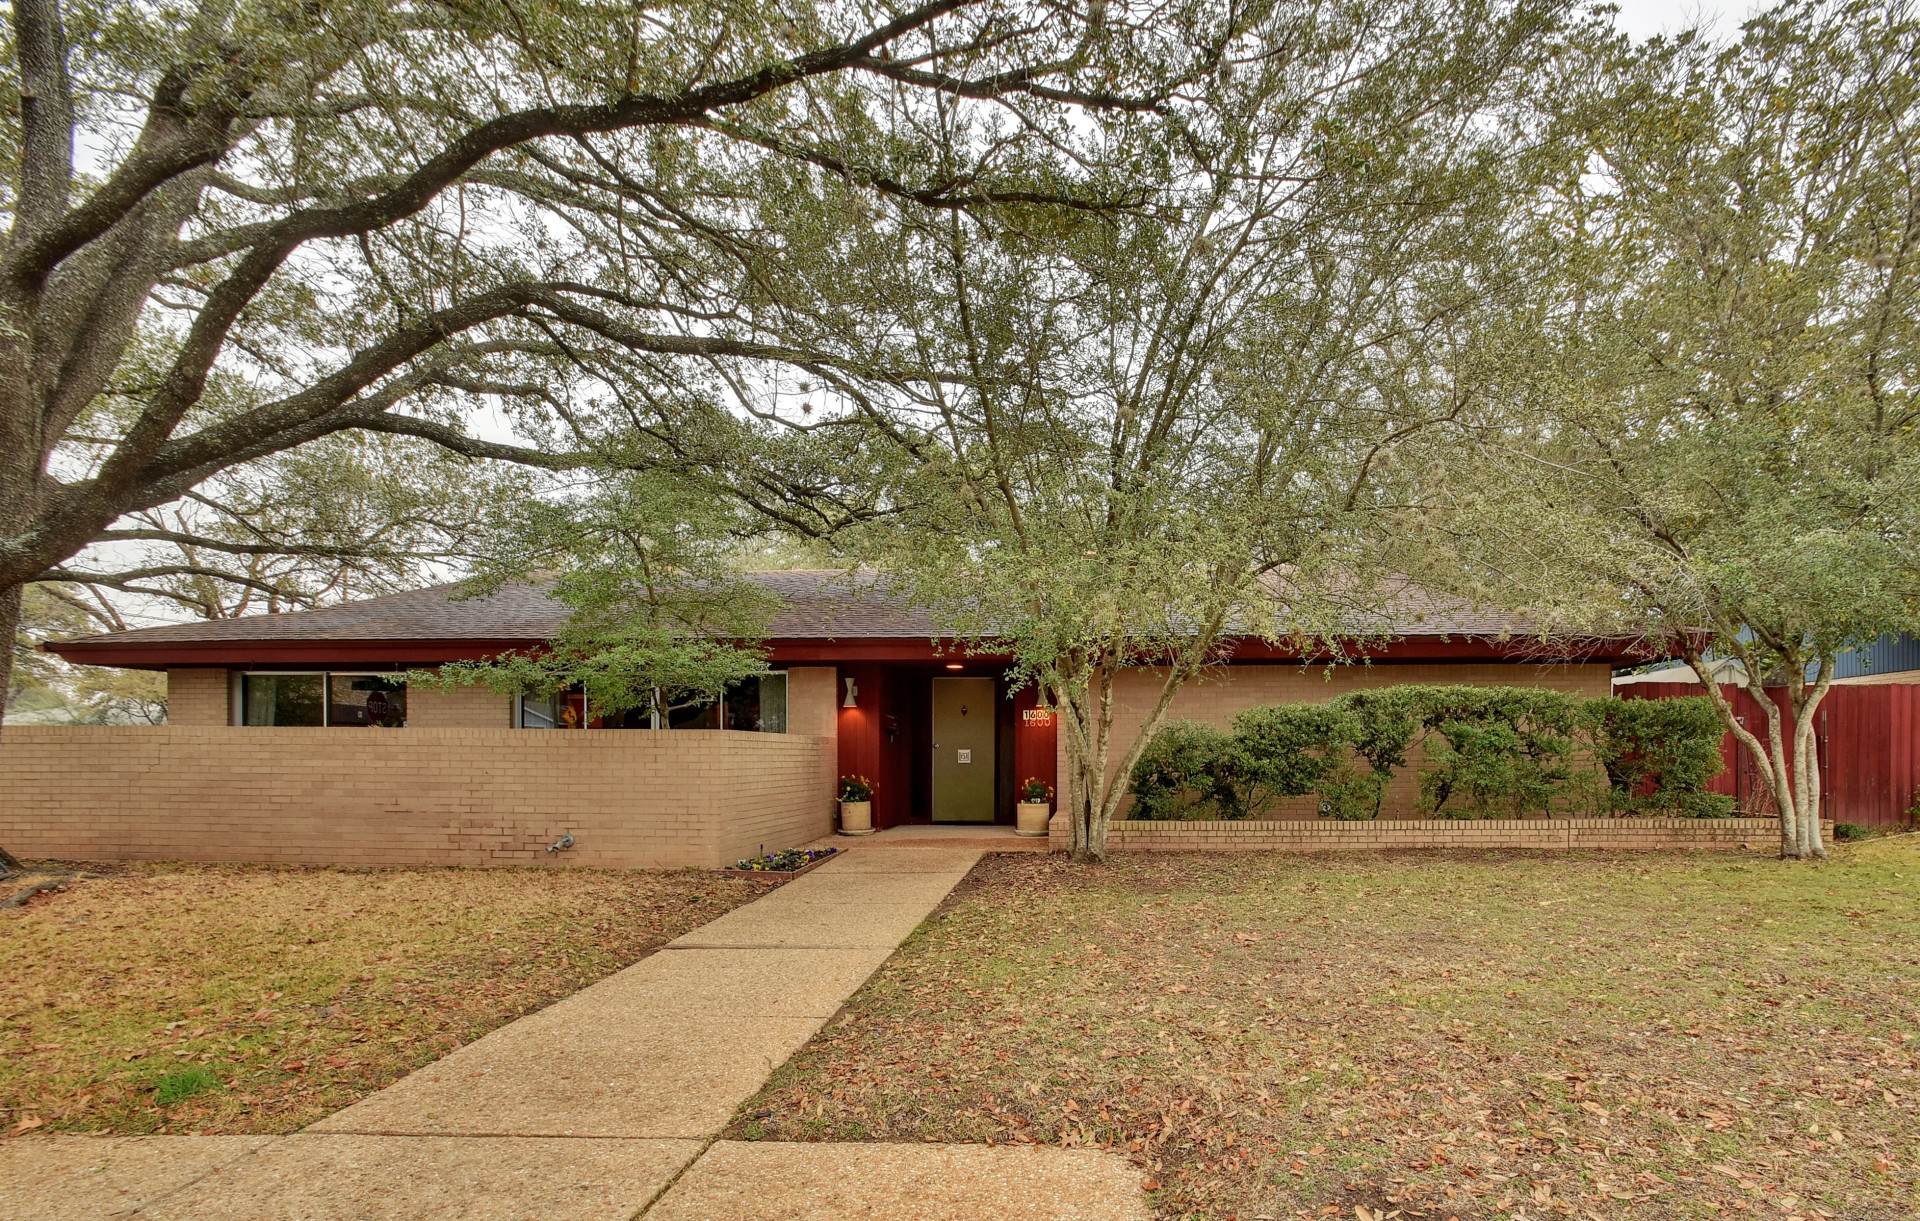 Low-slung, large ranch house with off-white brick, walled front courtyard, red trim, big oaks